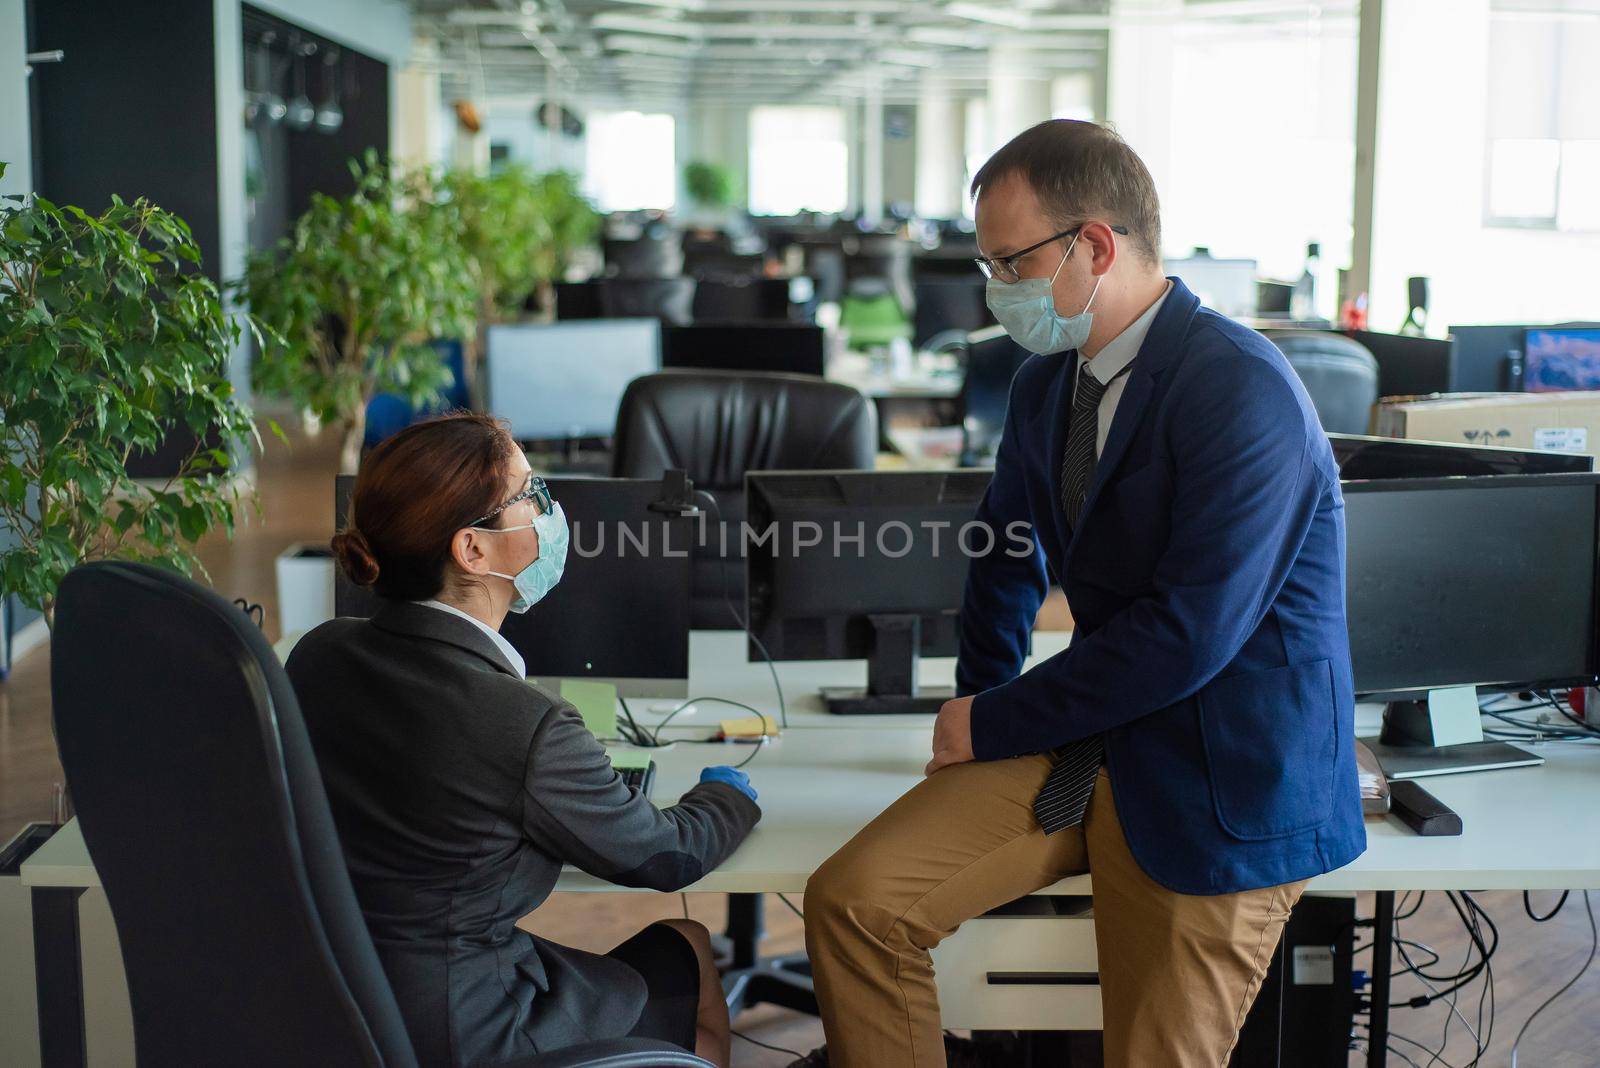 Colleagues work in medical masks in an open office space communicate at the desk. A man and a woman in office suits are discussing a working draft. The boss controls the subordinate. by mrwed54